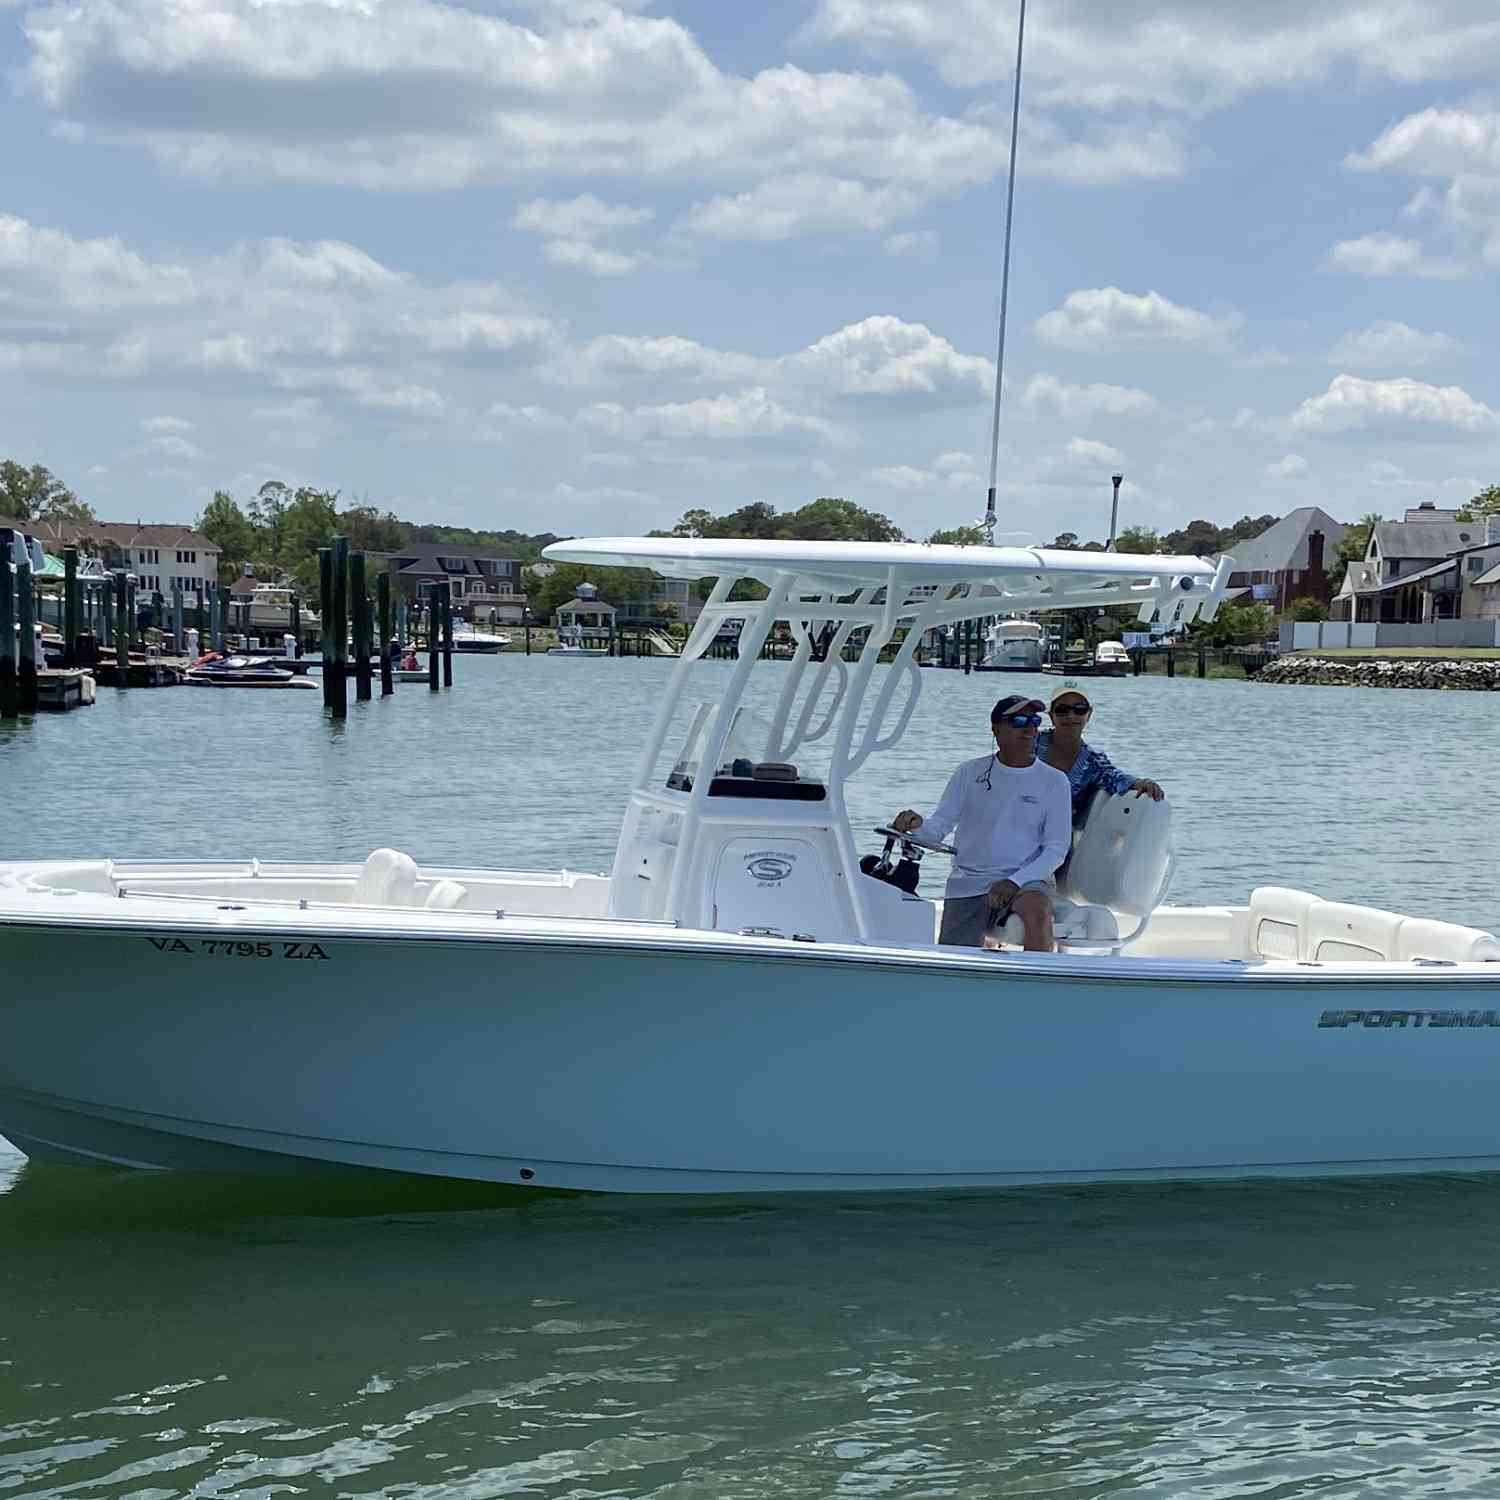 Title: Social distancing on Lake Wesley - On board their Sportsman Heritage 241 Center Console - Location: Virginia Beach, VA. Participating in the Photo Contest #SportsmanJune2020